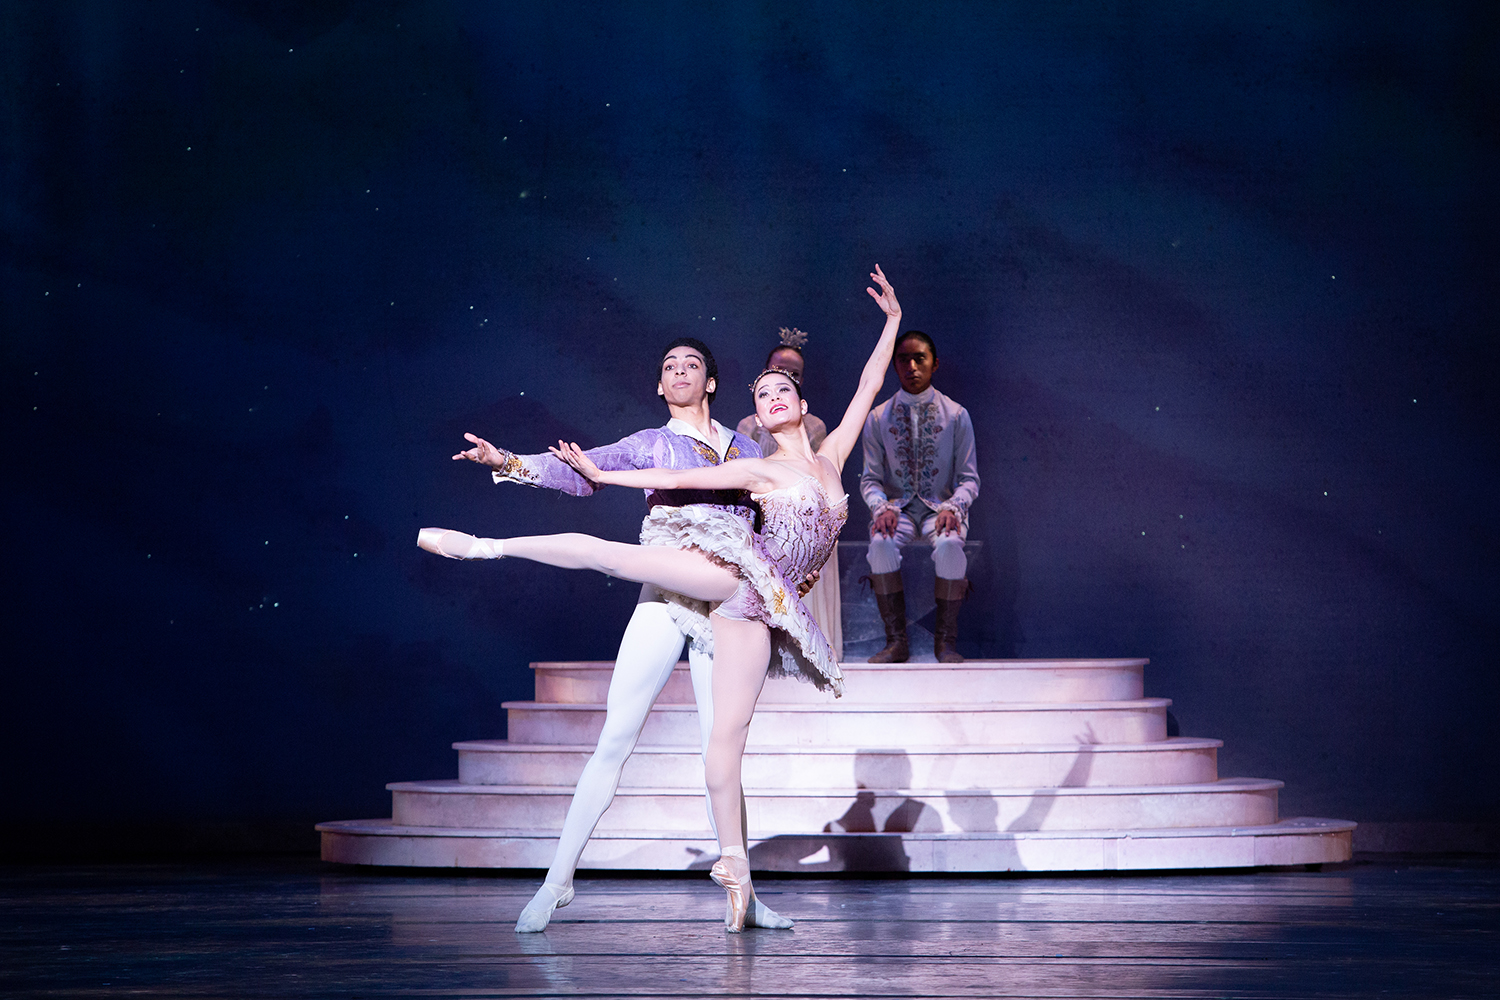 Mimi Tompkins and Ethan Prince in Ib Andersen's "The Nutcracker."